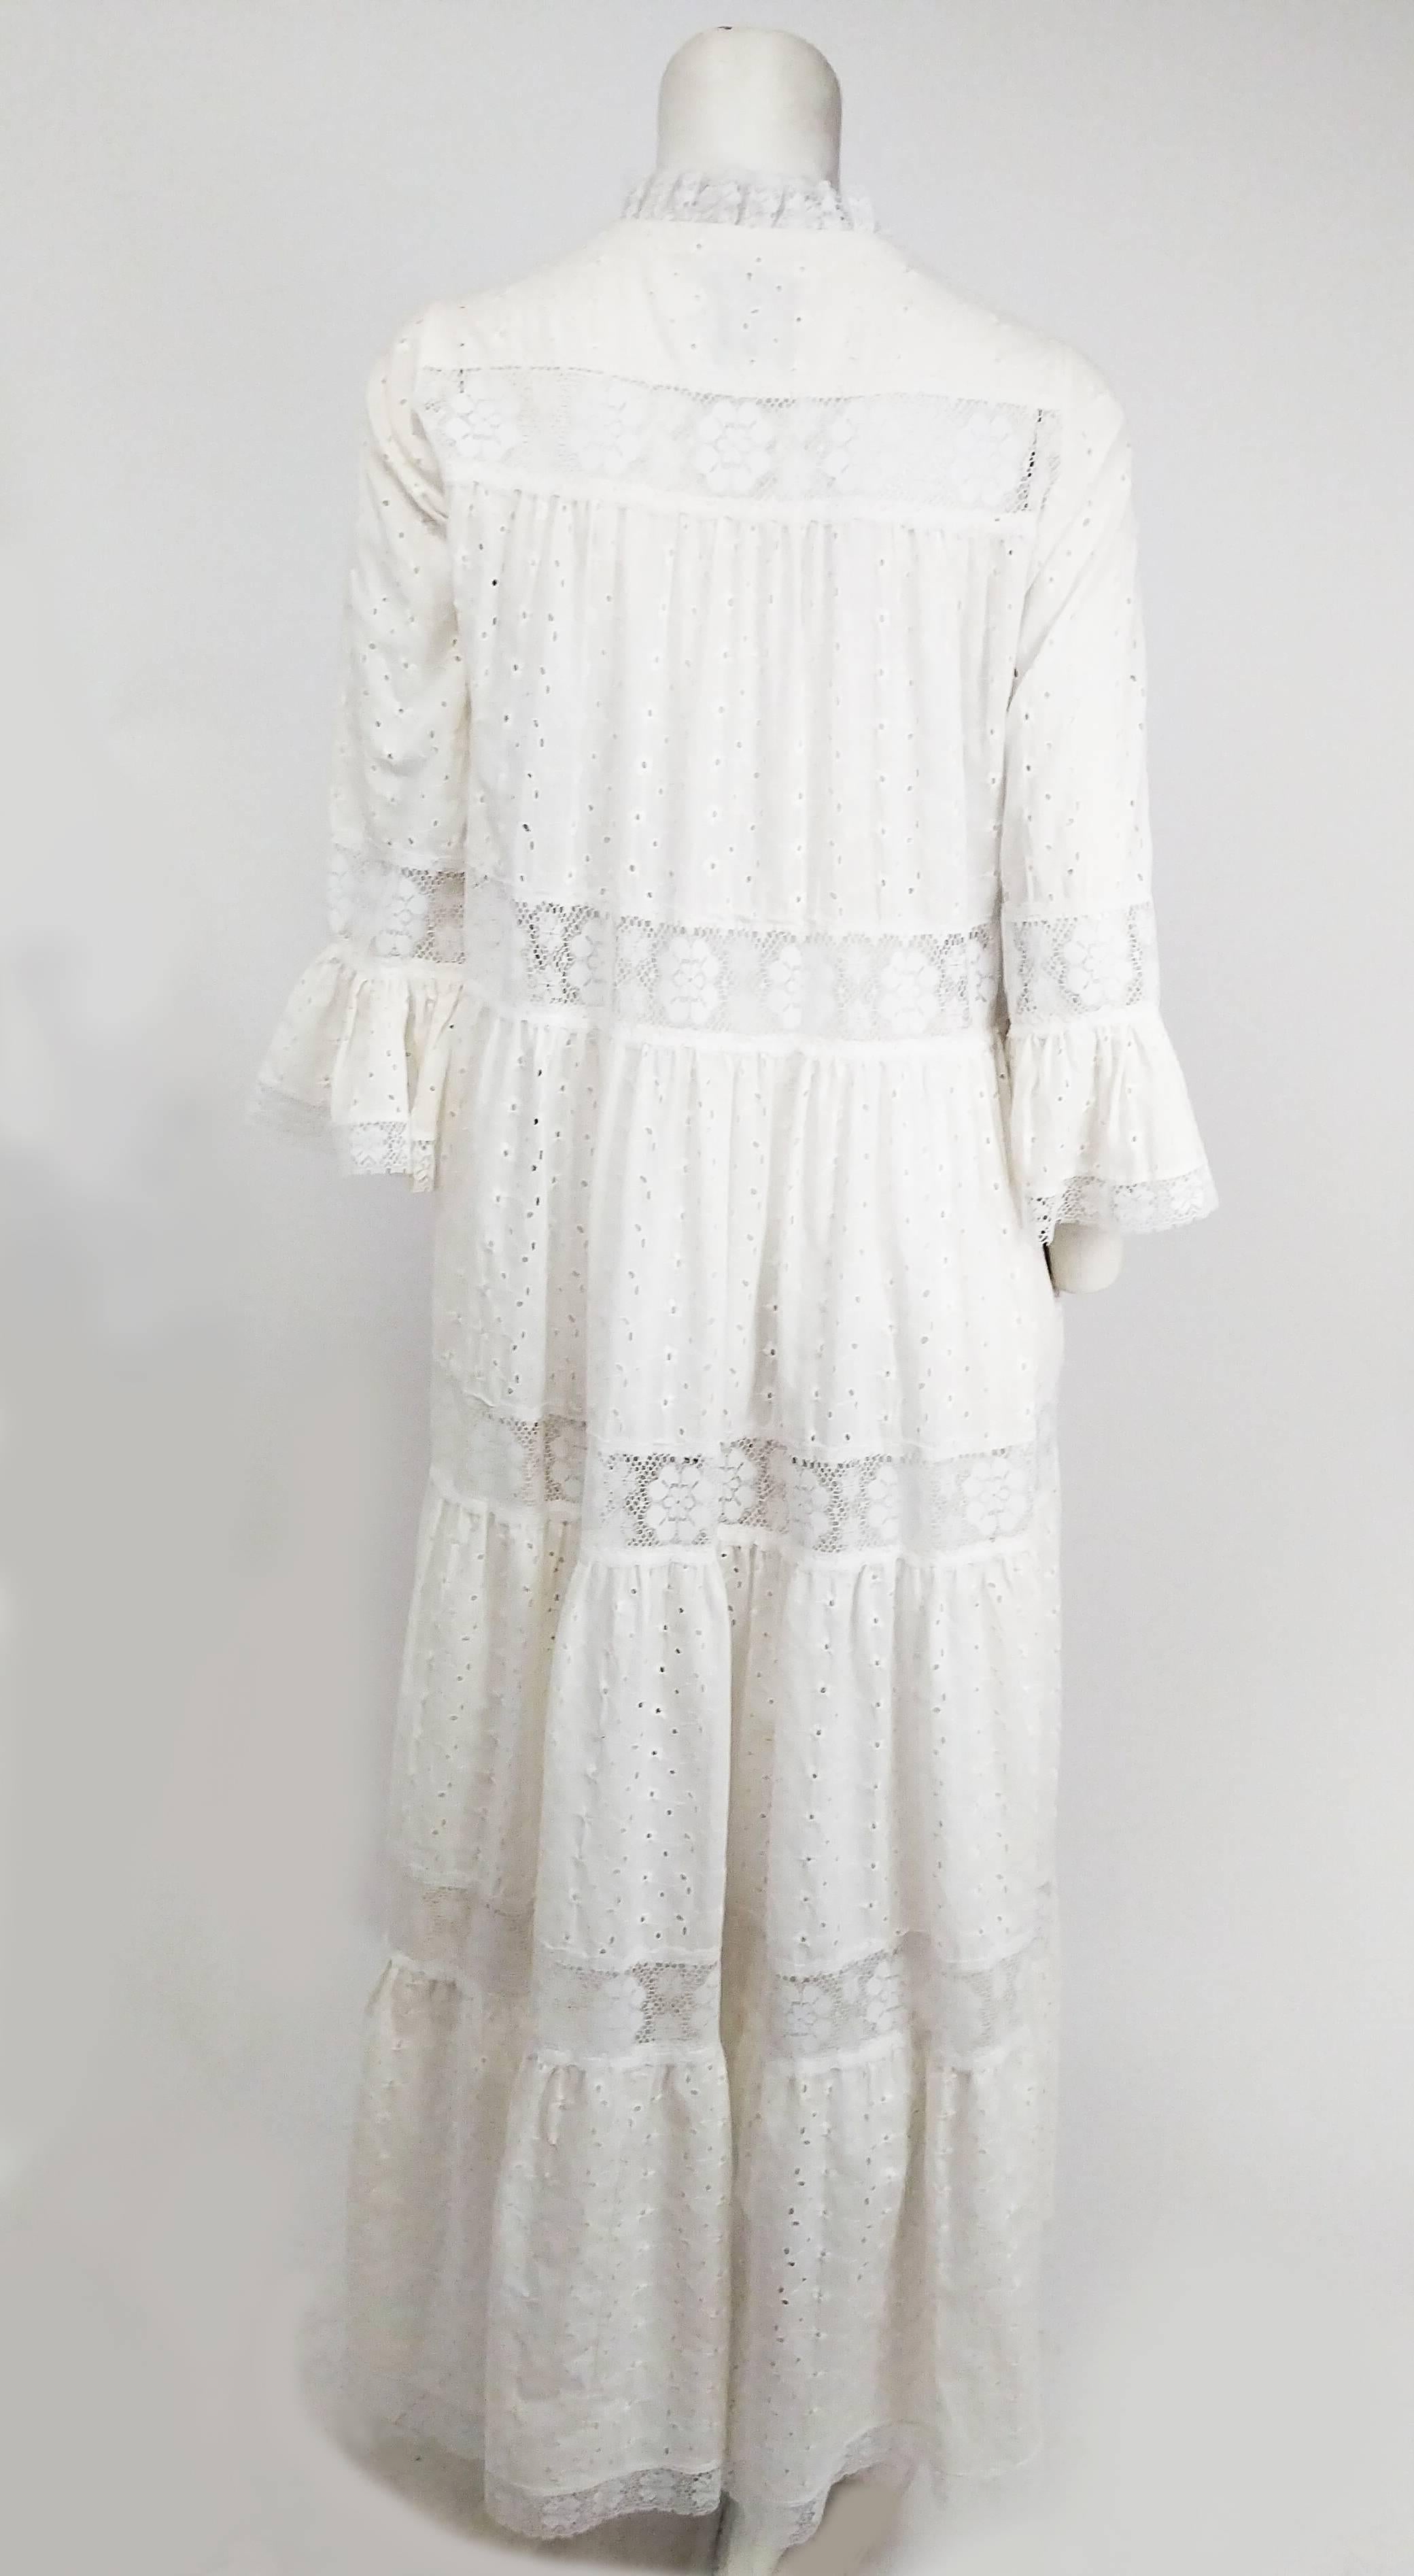 1970s White Lace Bohemian Maxi Dress. Zip up front closure, buttons at collar. Elbow length flounced sleeves. Unlined.